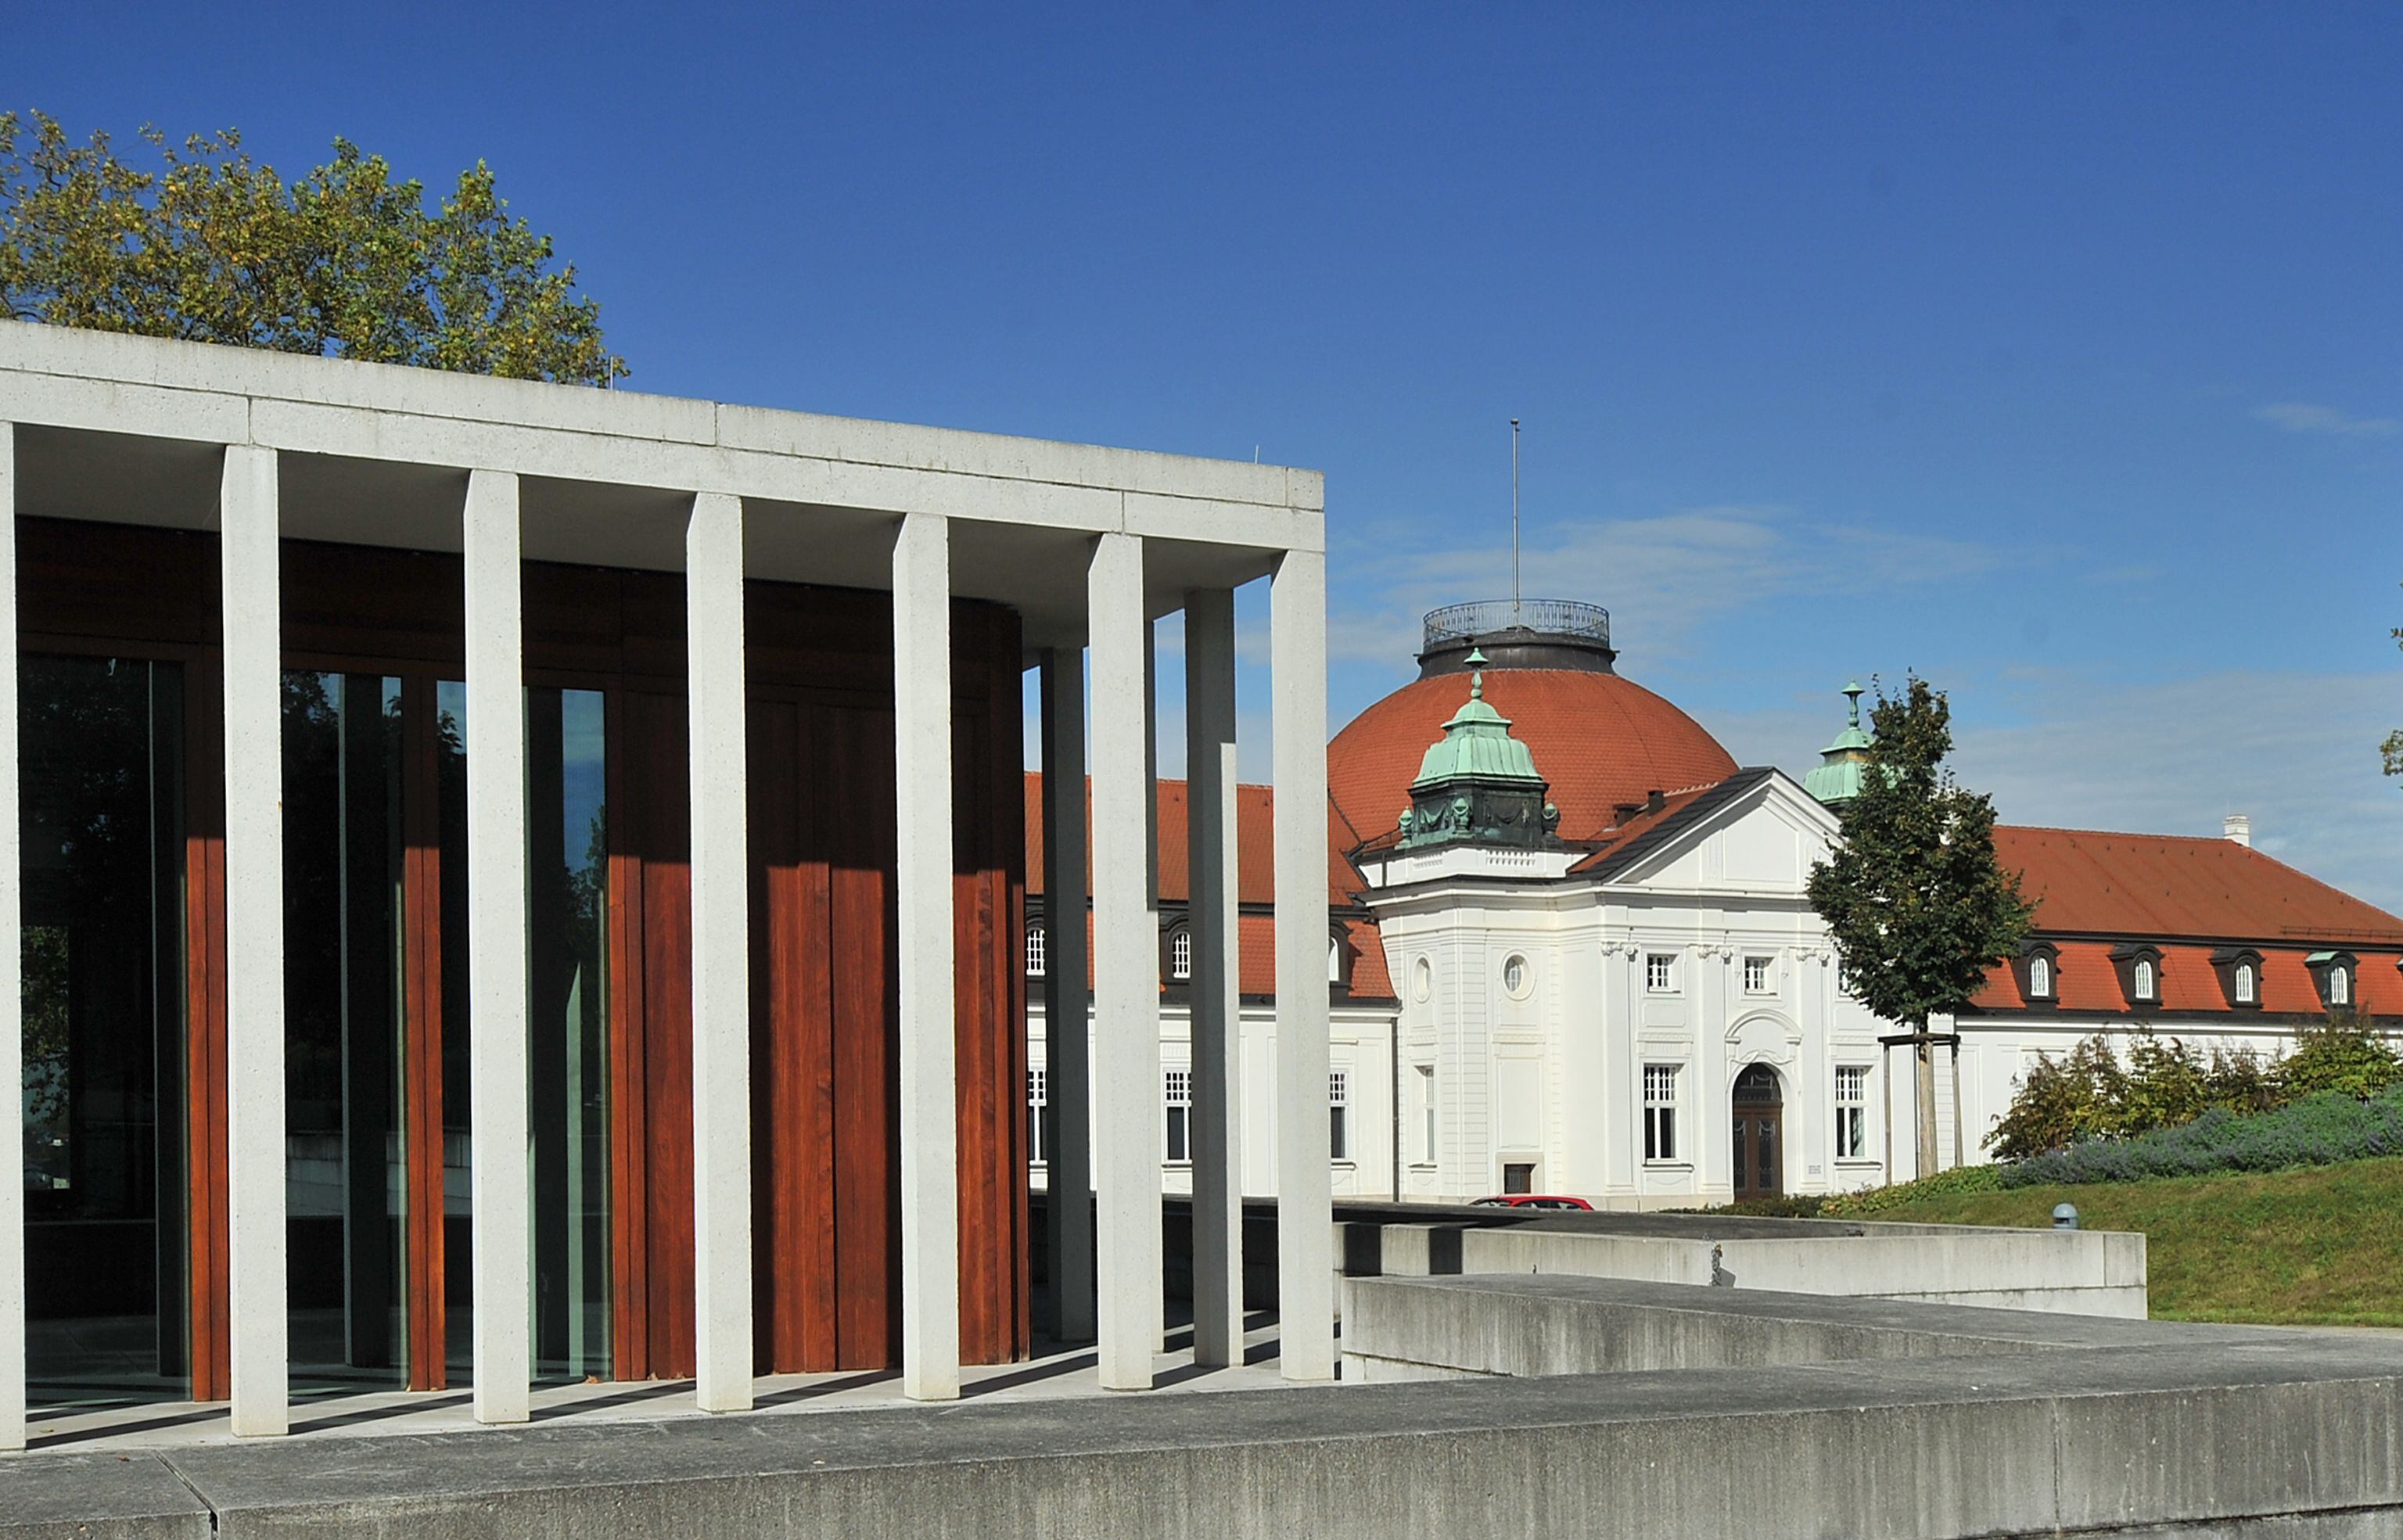 The Museum of Modern Literature in Marbach am Neckar, Germany.